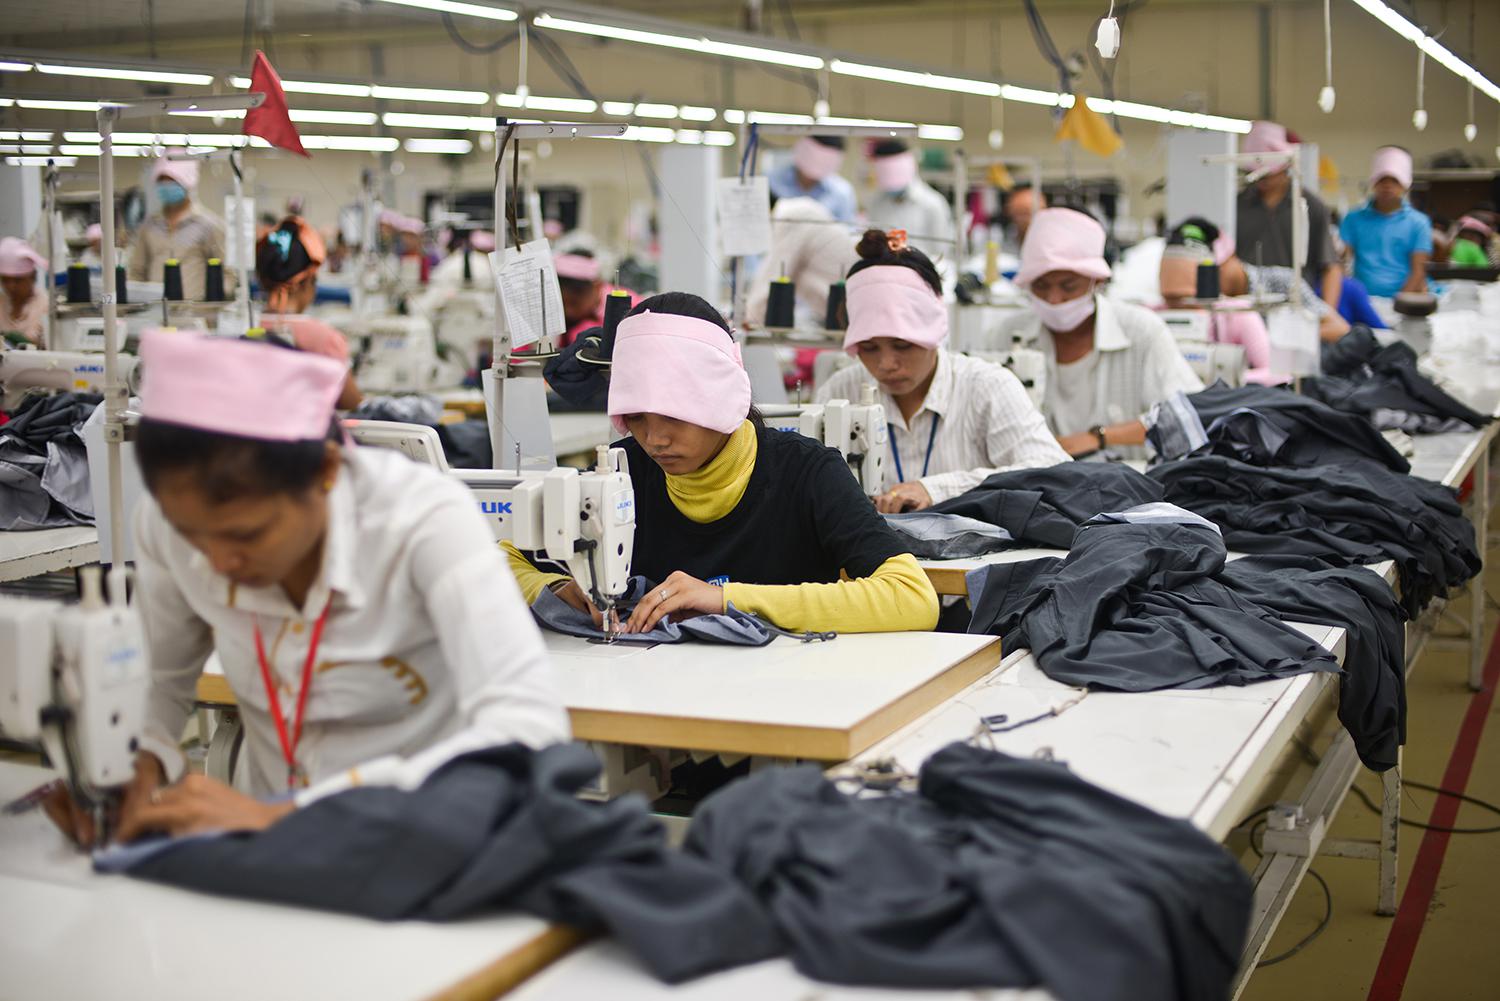 Women in the sewing division of a factory in Phnom Penh, Cambodia’s capital. Women constitute about 90 percent of the workforce in Cambodia’s garment industry.